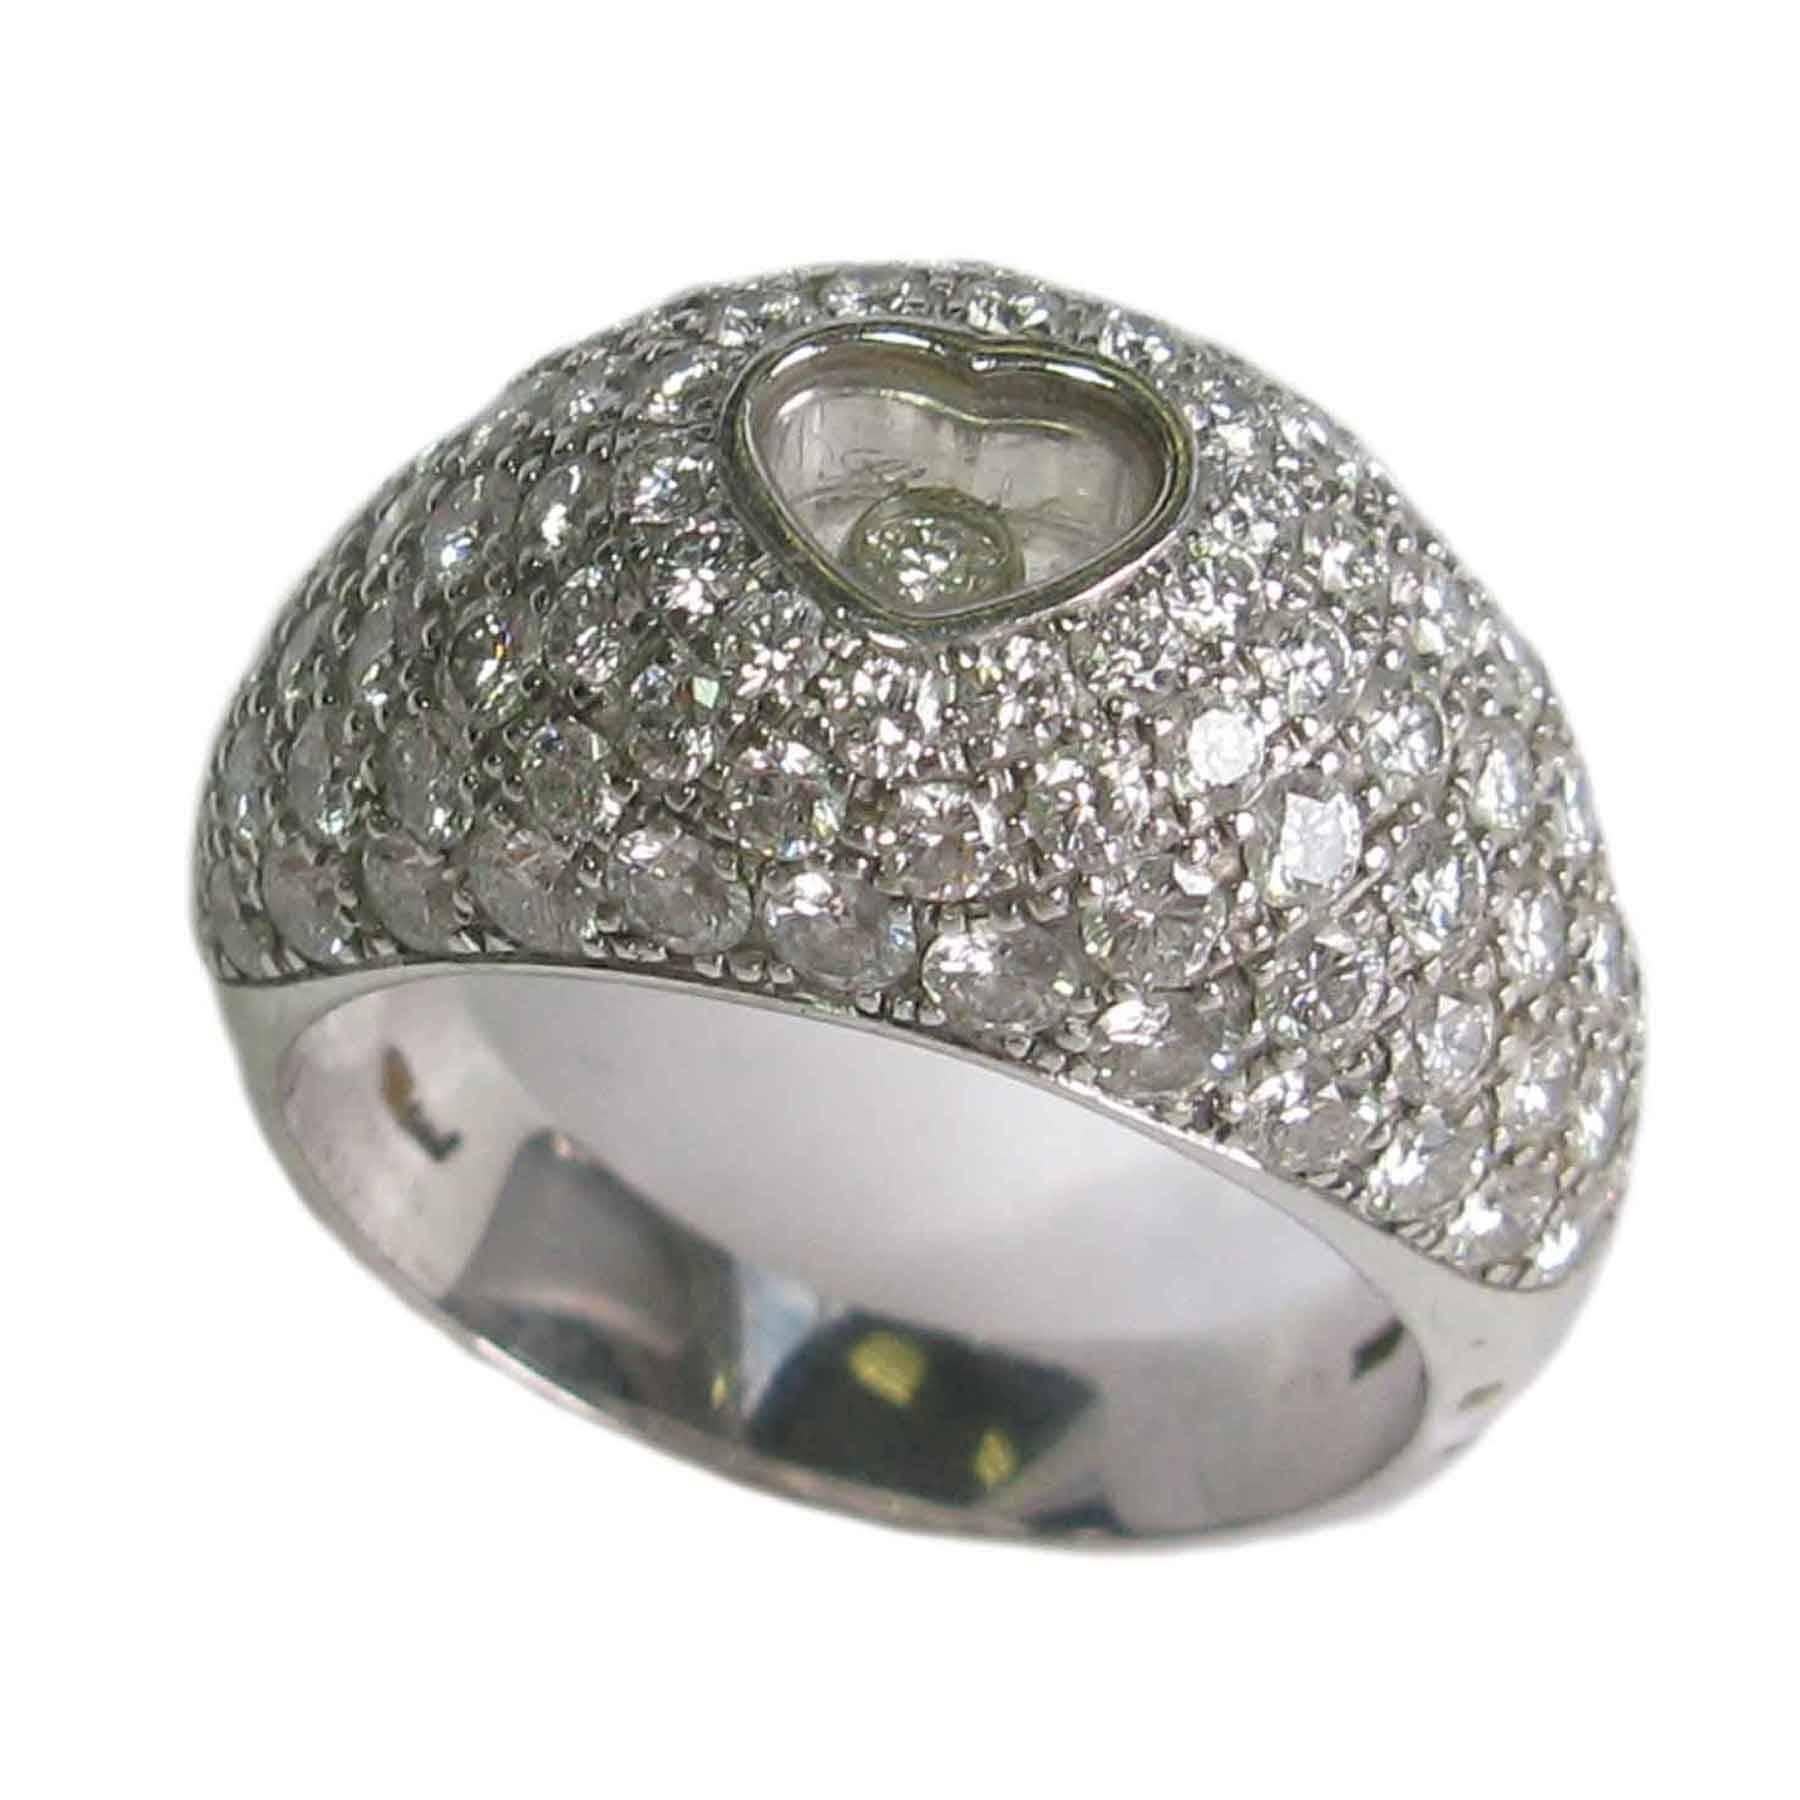 CHOPARD Ring in 18K White Gold set with Brilliant Cut Diamonds Size 56 In Excellent Condition For Sale In Paris, FR